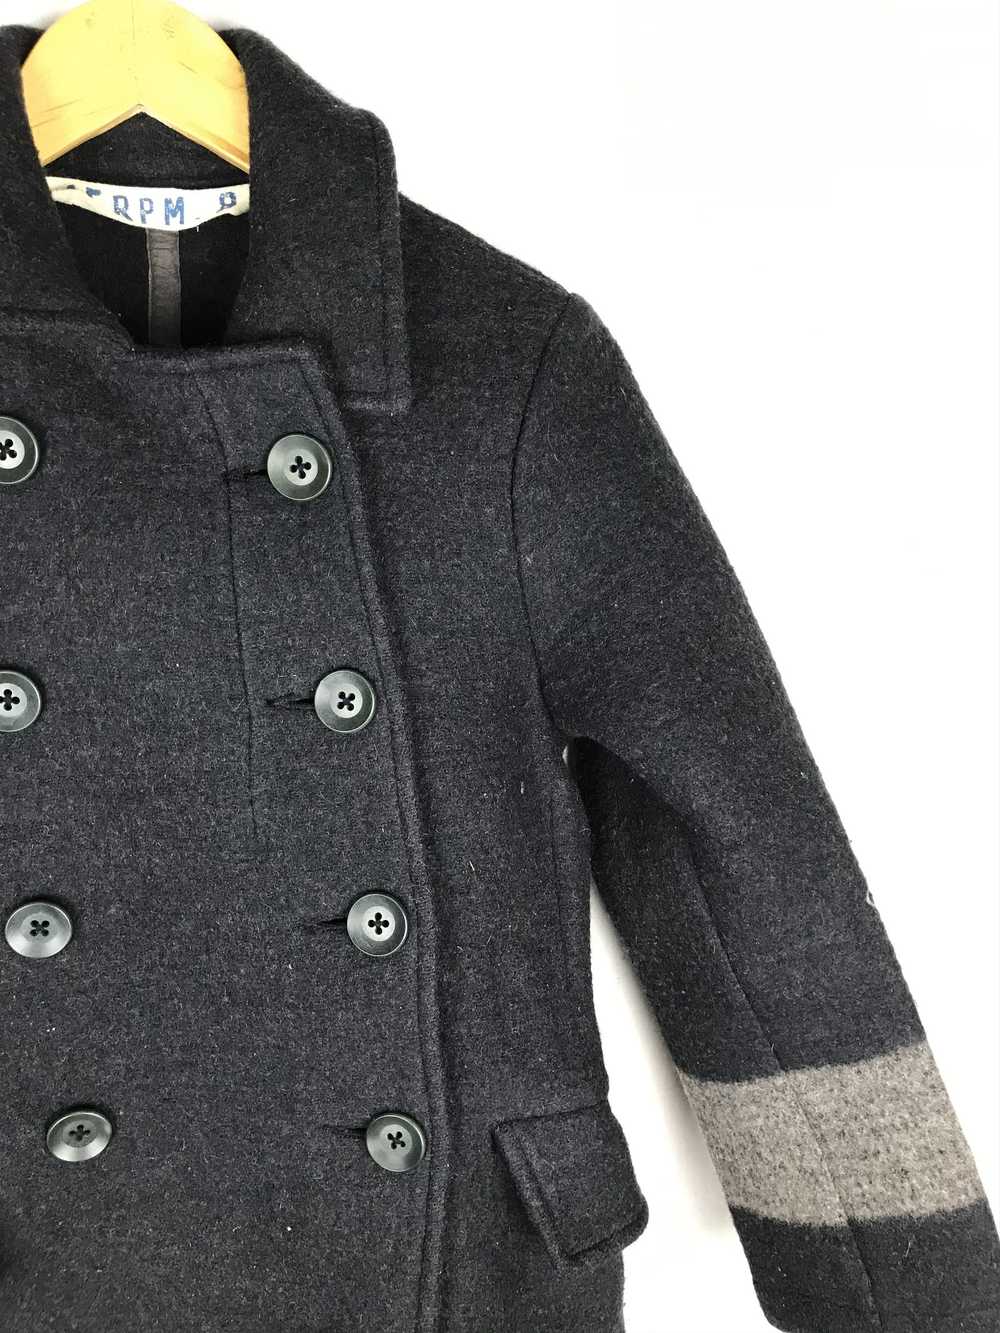 45rpm 45Rpm Wool Jacket, 100 % made in Japan - image 3